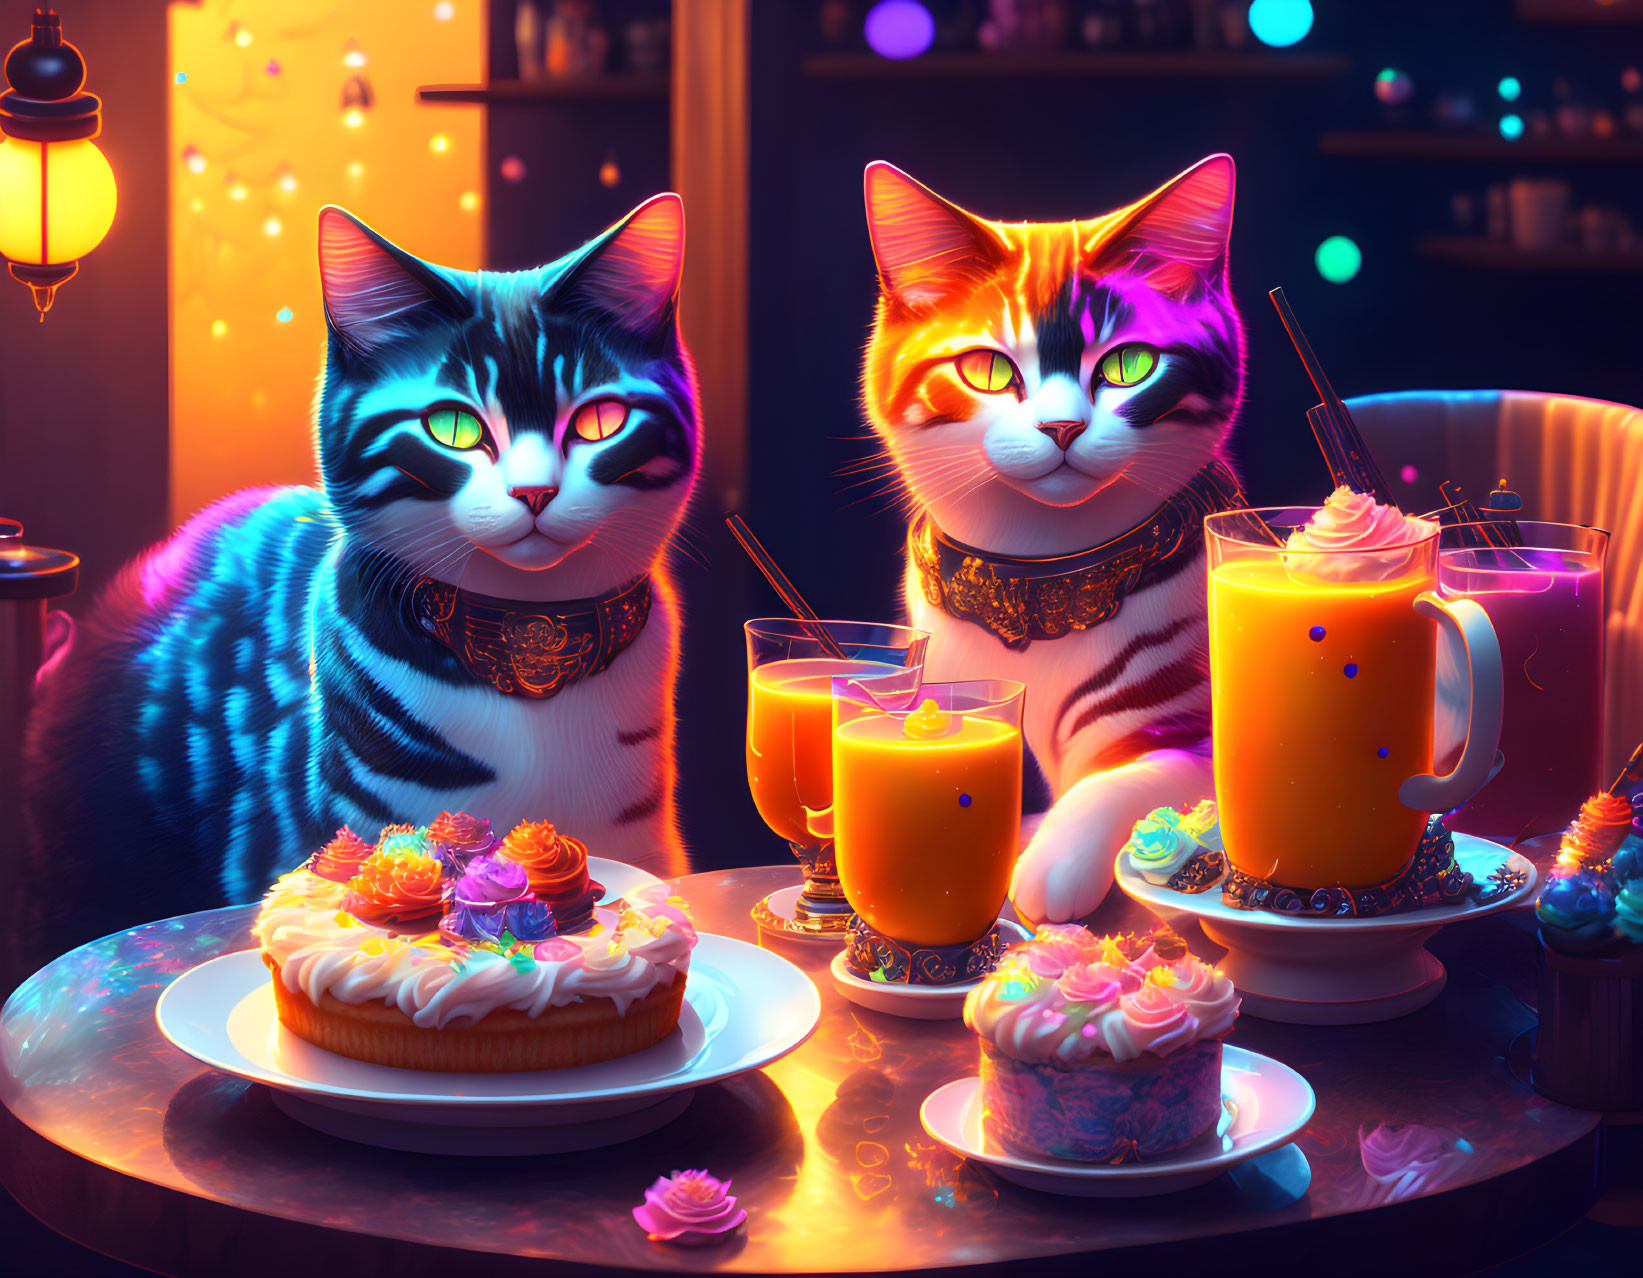 Animated cats enjoying pastries and drinks in cozy room